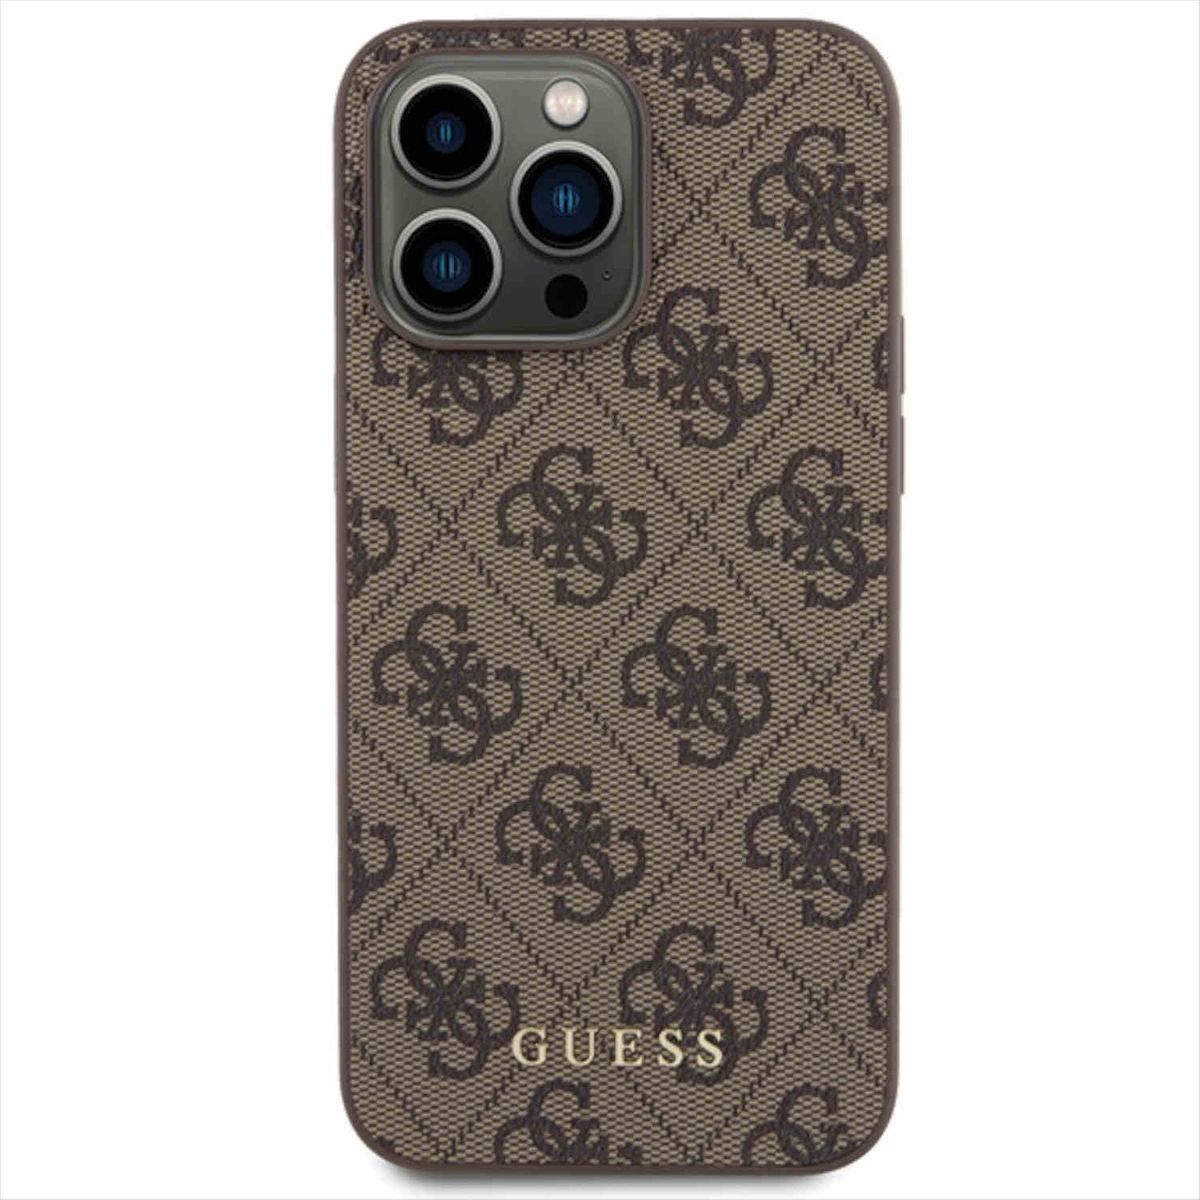 Gold Tasche Metal iPhone 4G Backcover, 15 Max, Braun Pro Apple, Hülle, GUESS Logo